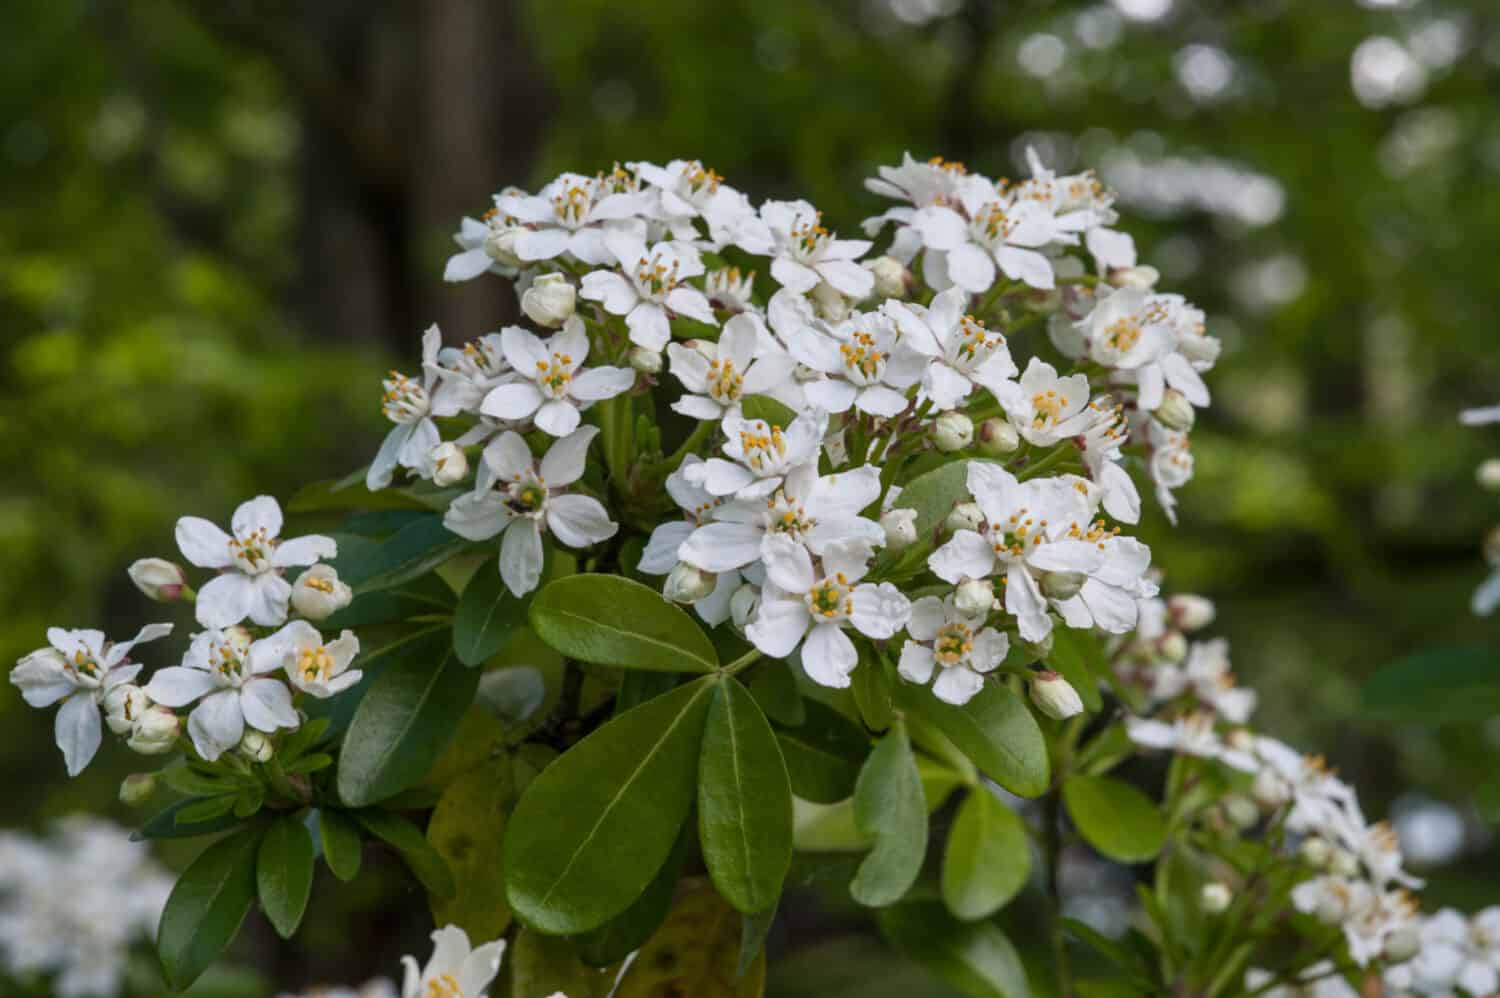 A close-up of a Choisya White Dazzler plant, showcasing its stunning white blossoms and vibrant foliage.